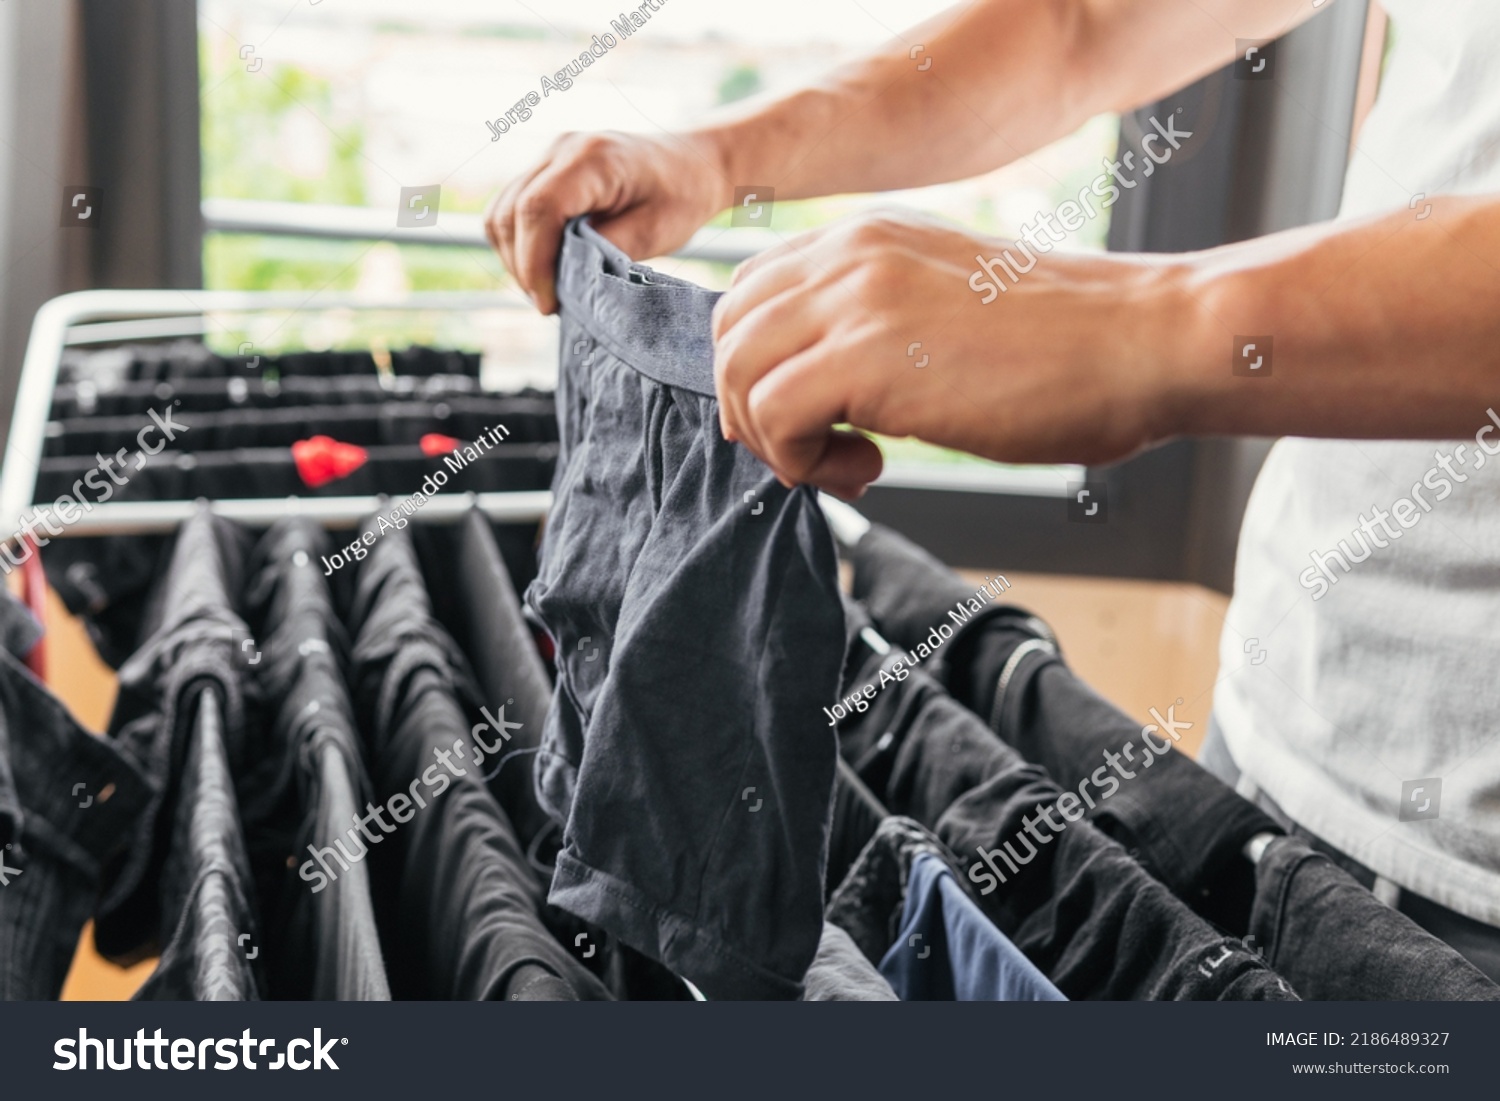 Close up image of a person's hands hanging underwear on a metal indoor clothesline. Householder doing housework happy and content to feel fulfilled. Man completing the laundry. #2186489327